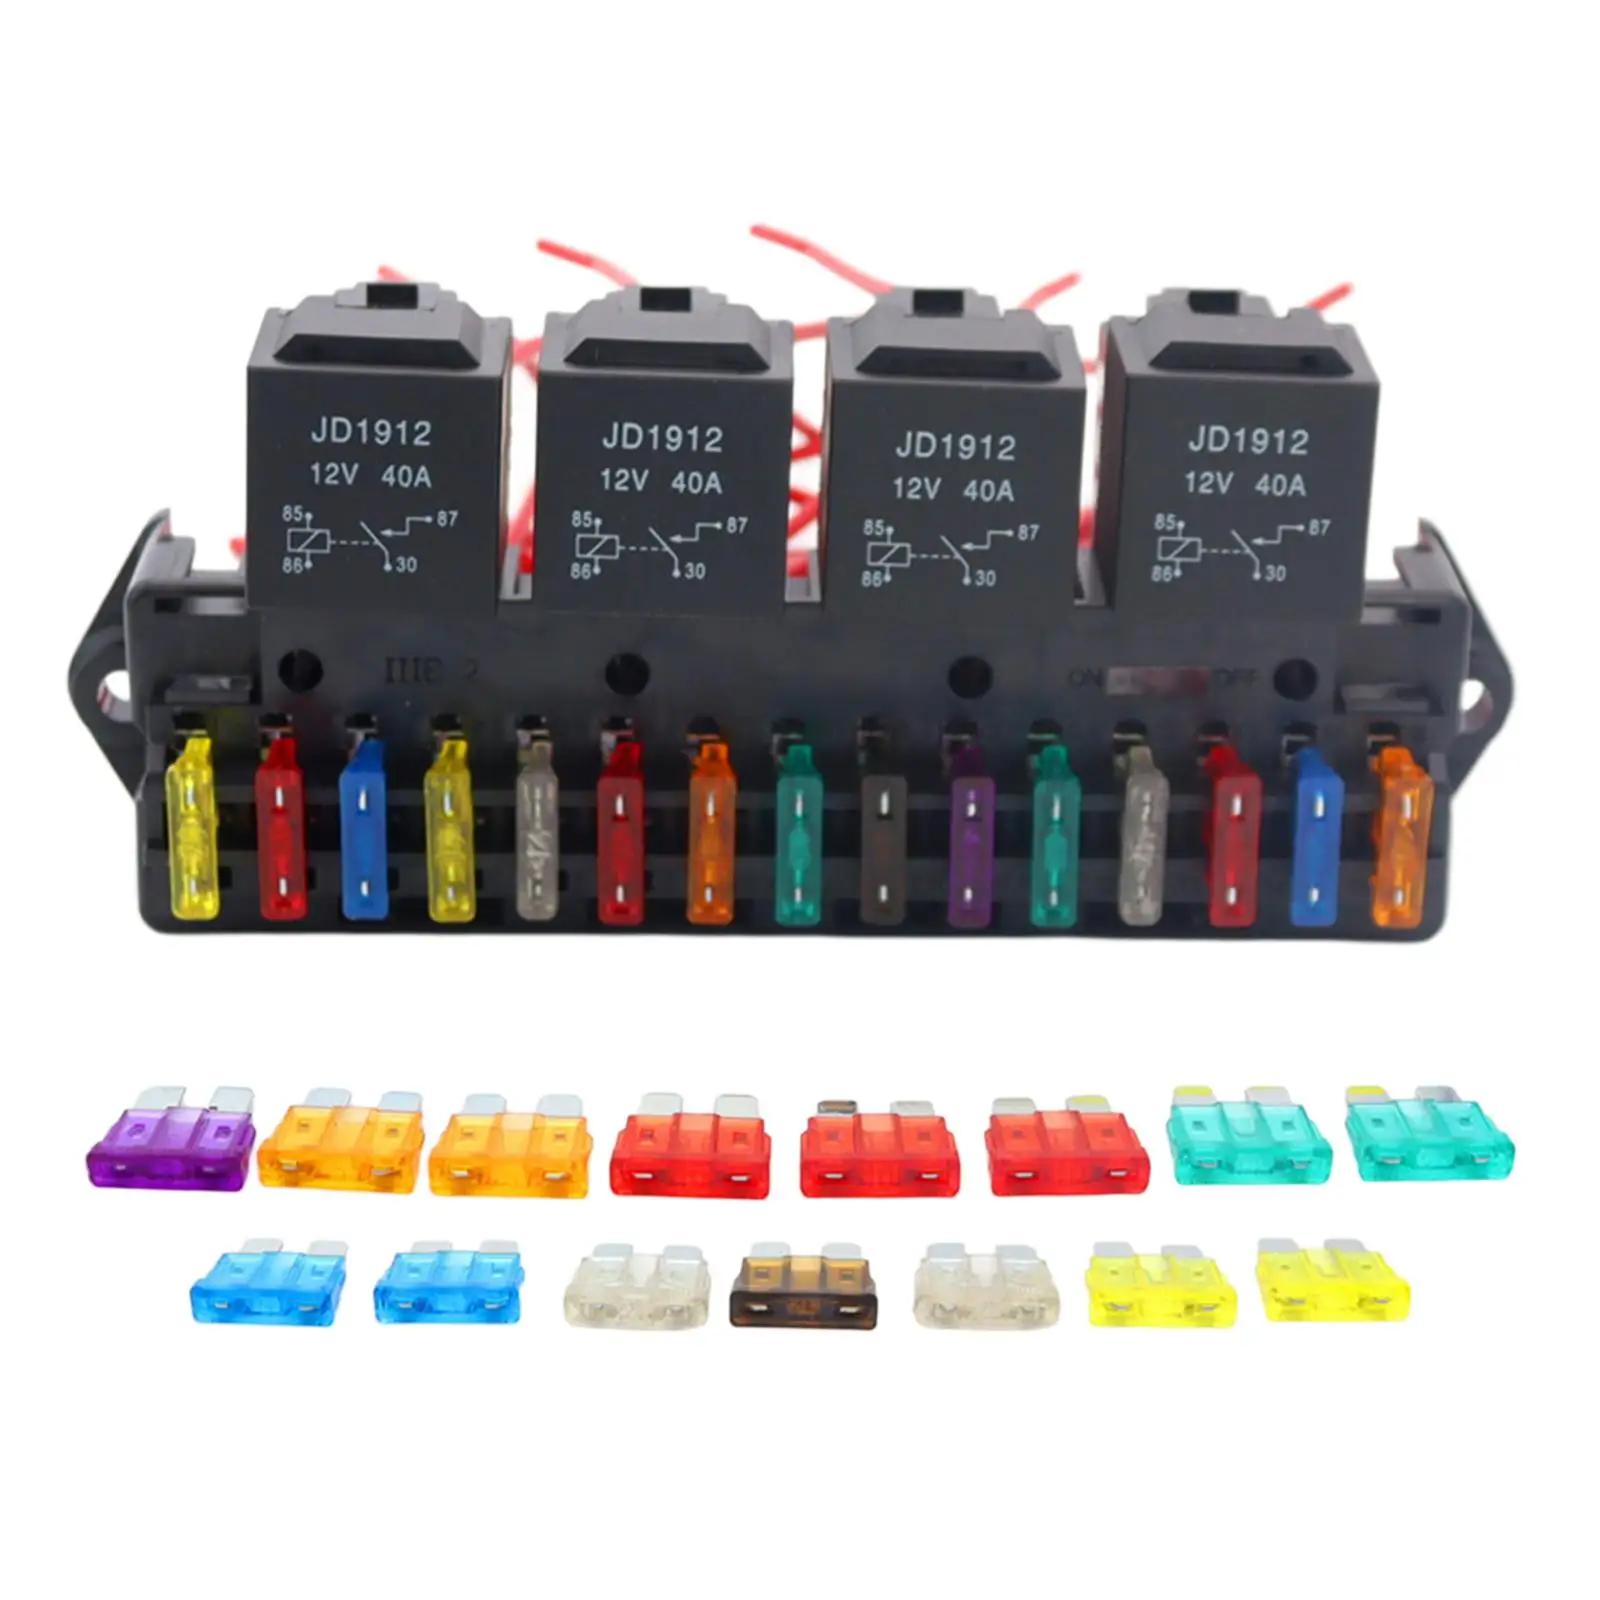 15-Way Car Fuse Box Block Holder Harness Assembly Wiring Multi Circuit Socket Base for Marine Boat Auto Vehicle Bus